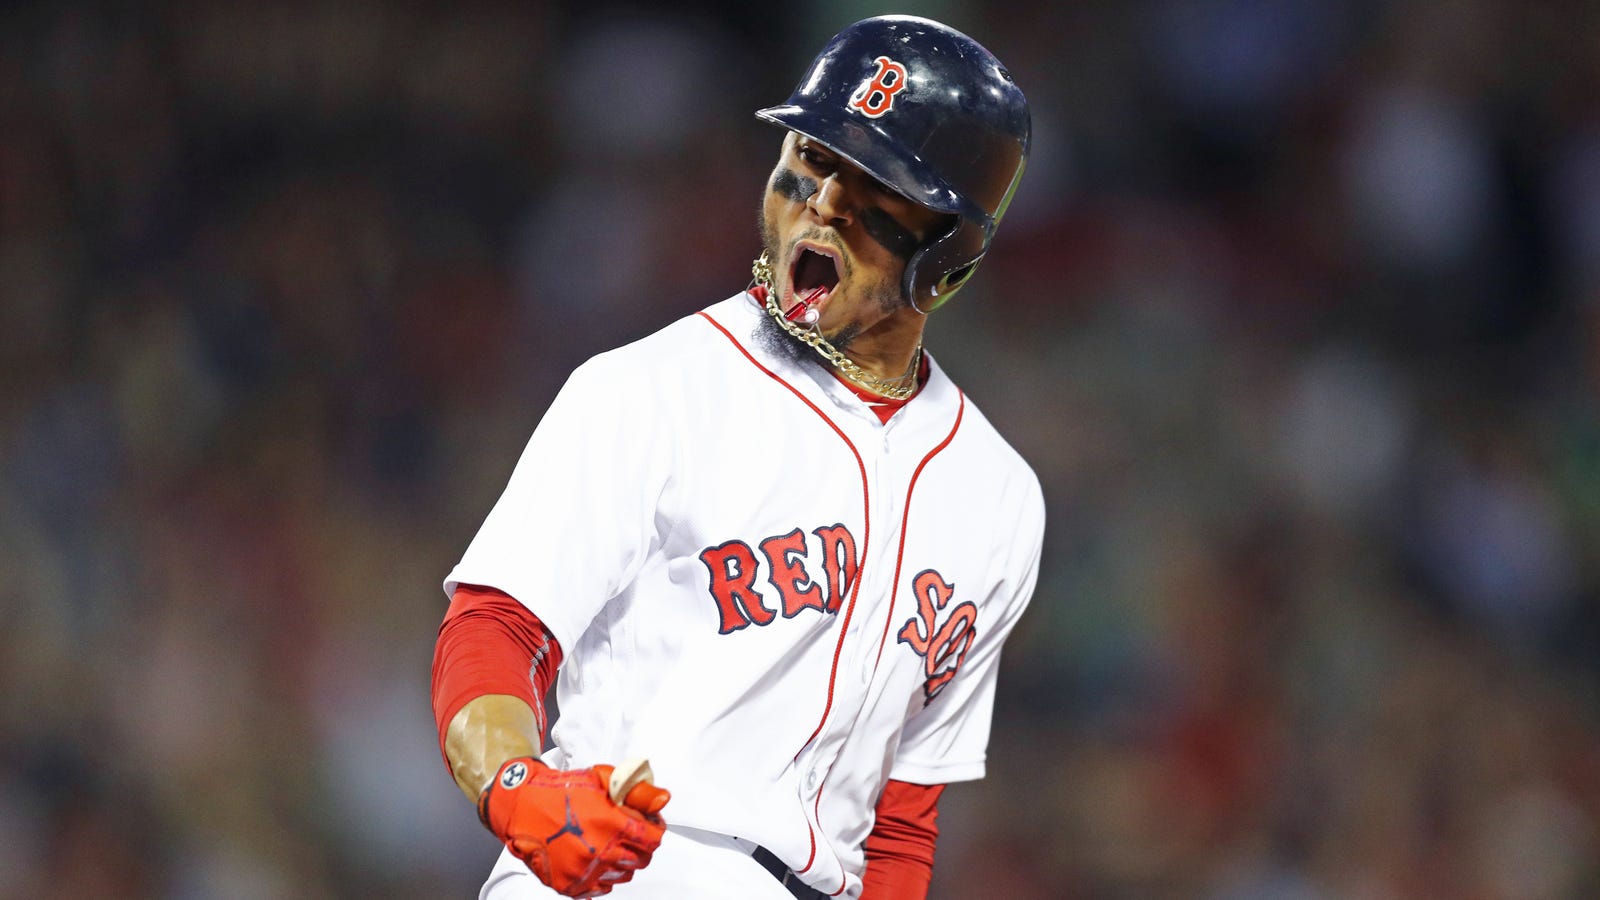 Mookie Betts Hit A Grand Slam For The Red Sox After 13 Pitches1600 x 900